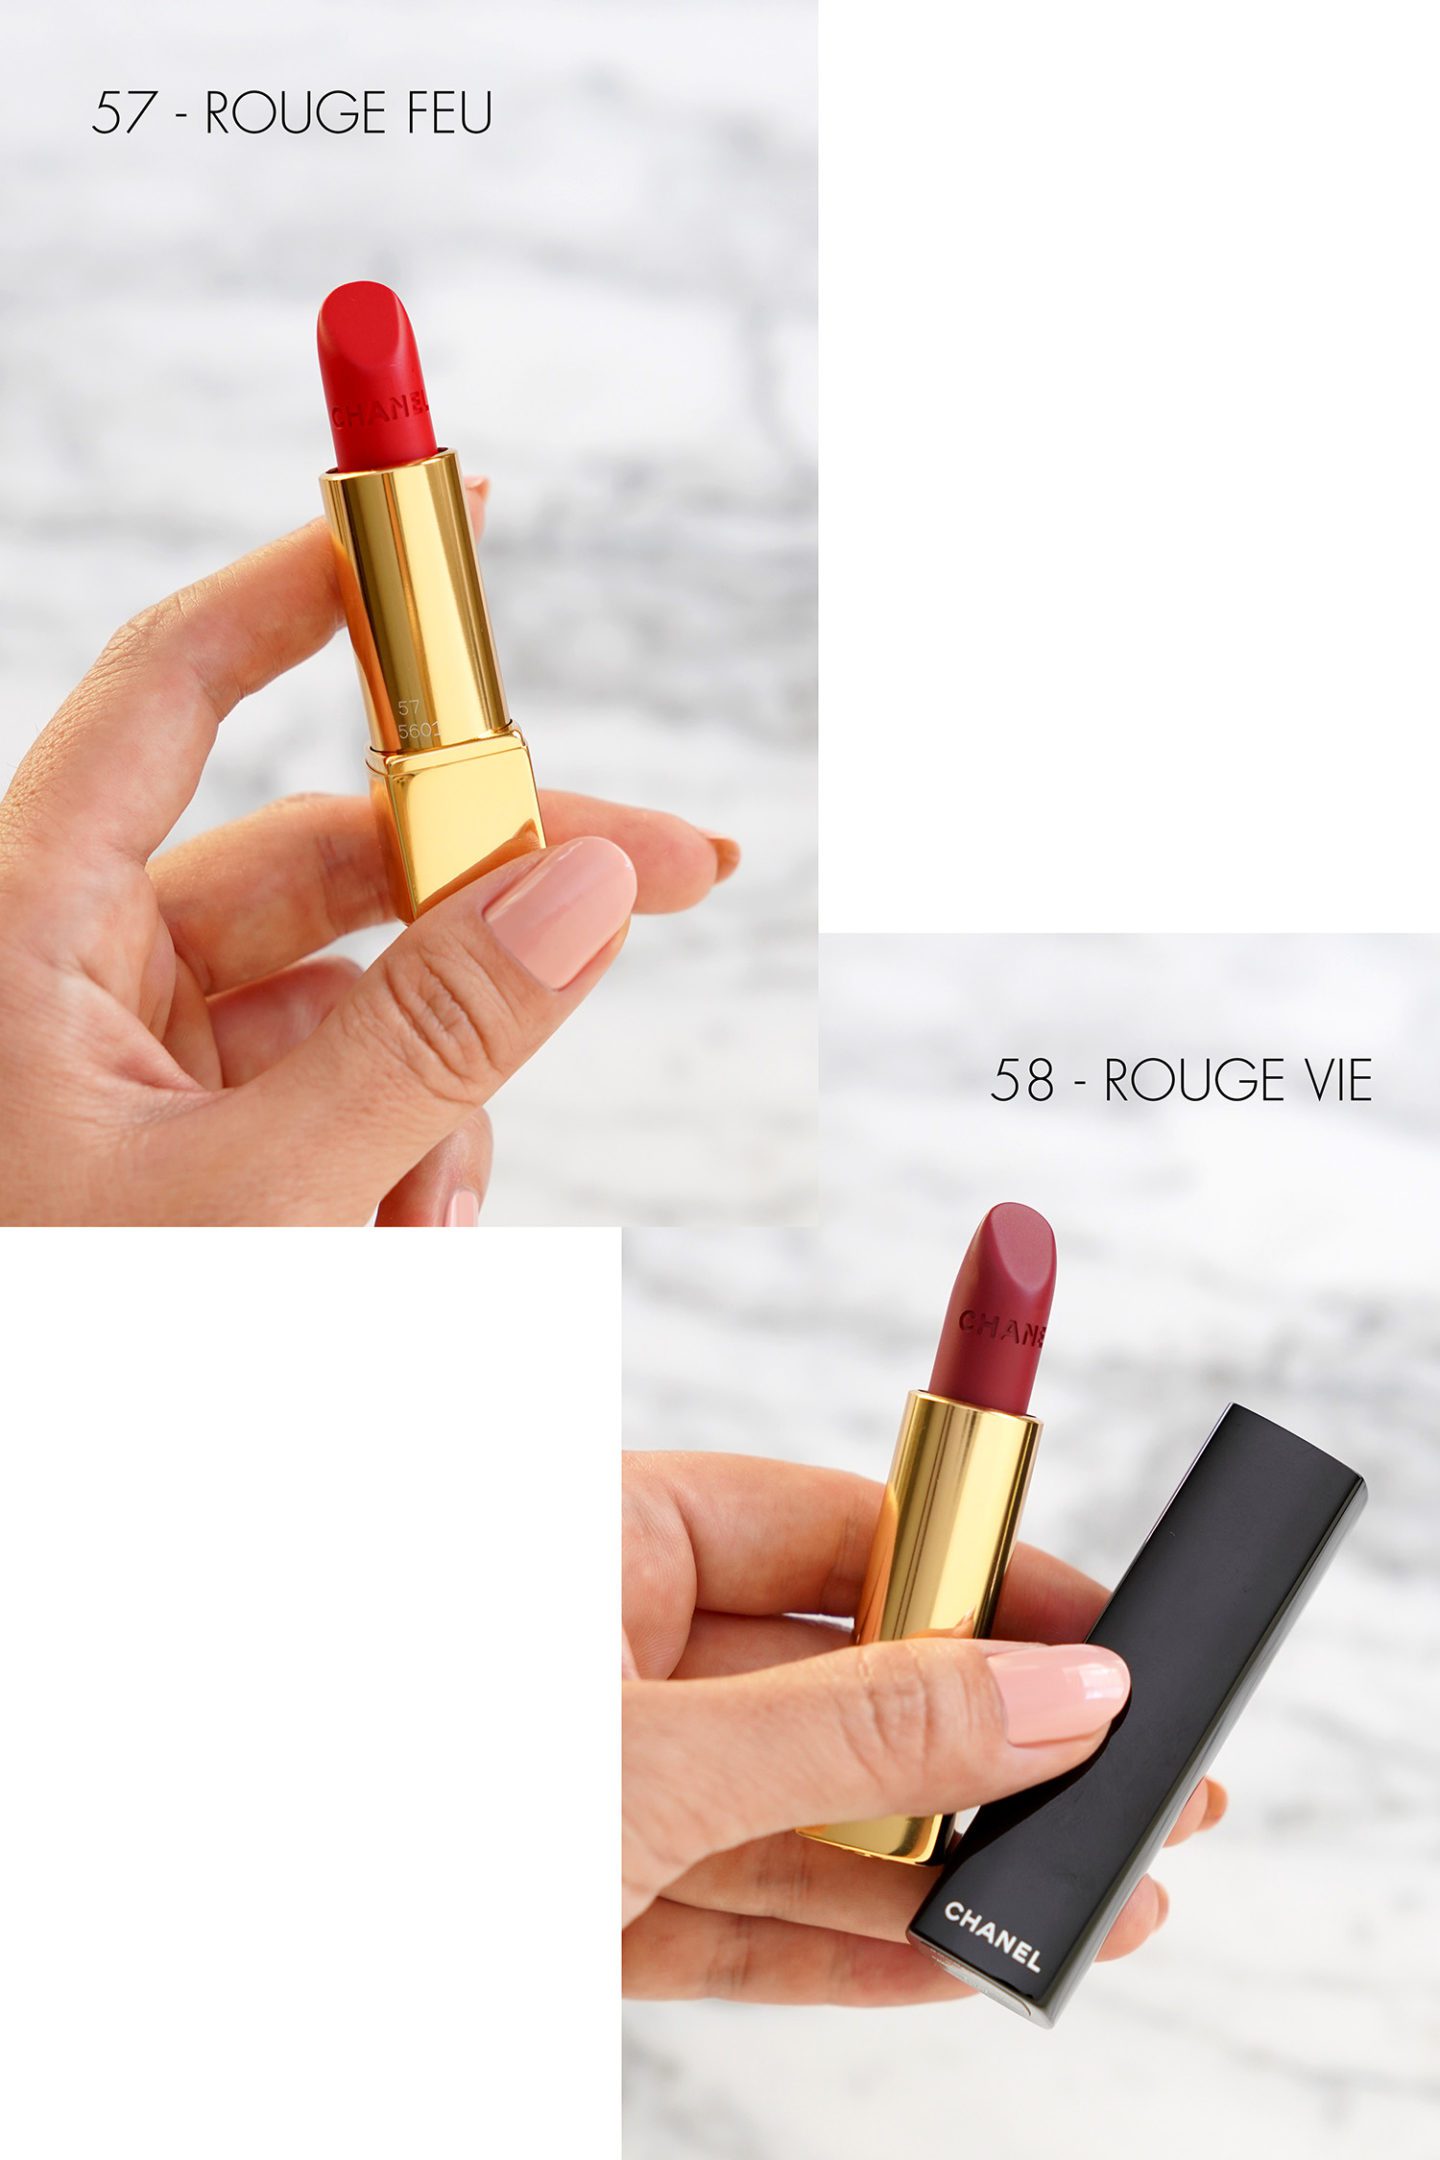 Chanel Rouge Allure Velvet 57 Rouge Feu and 58 Rouge Vie